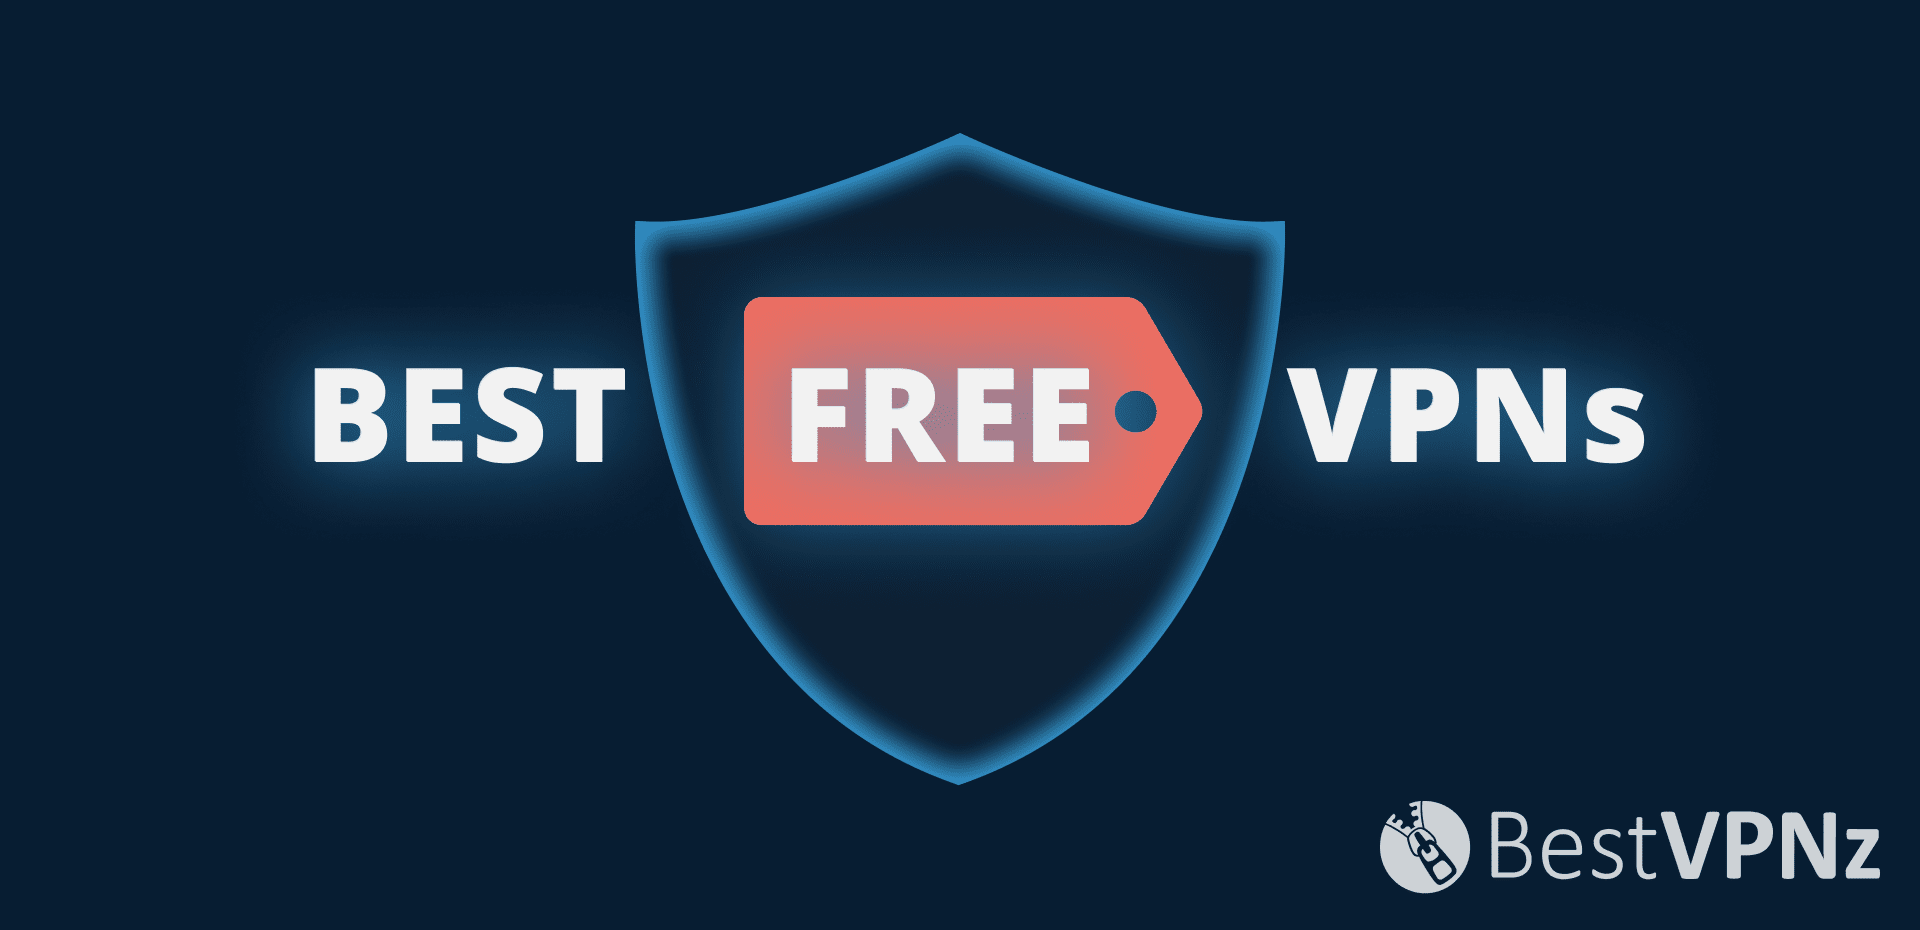 whats the best free vpn